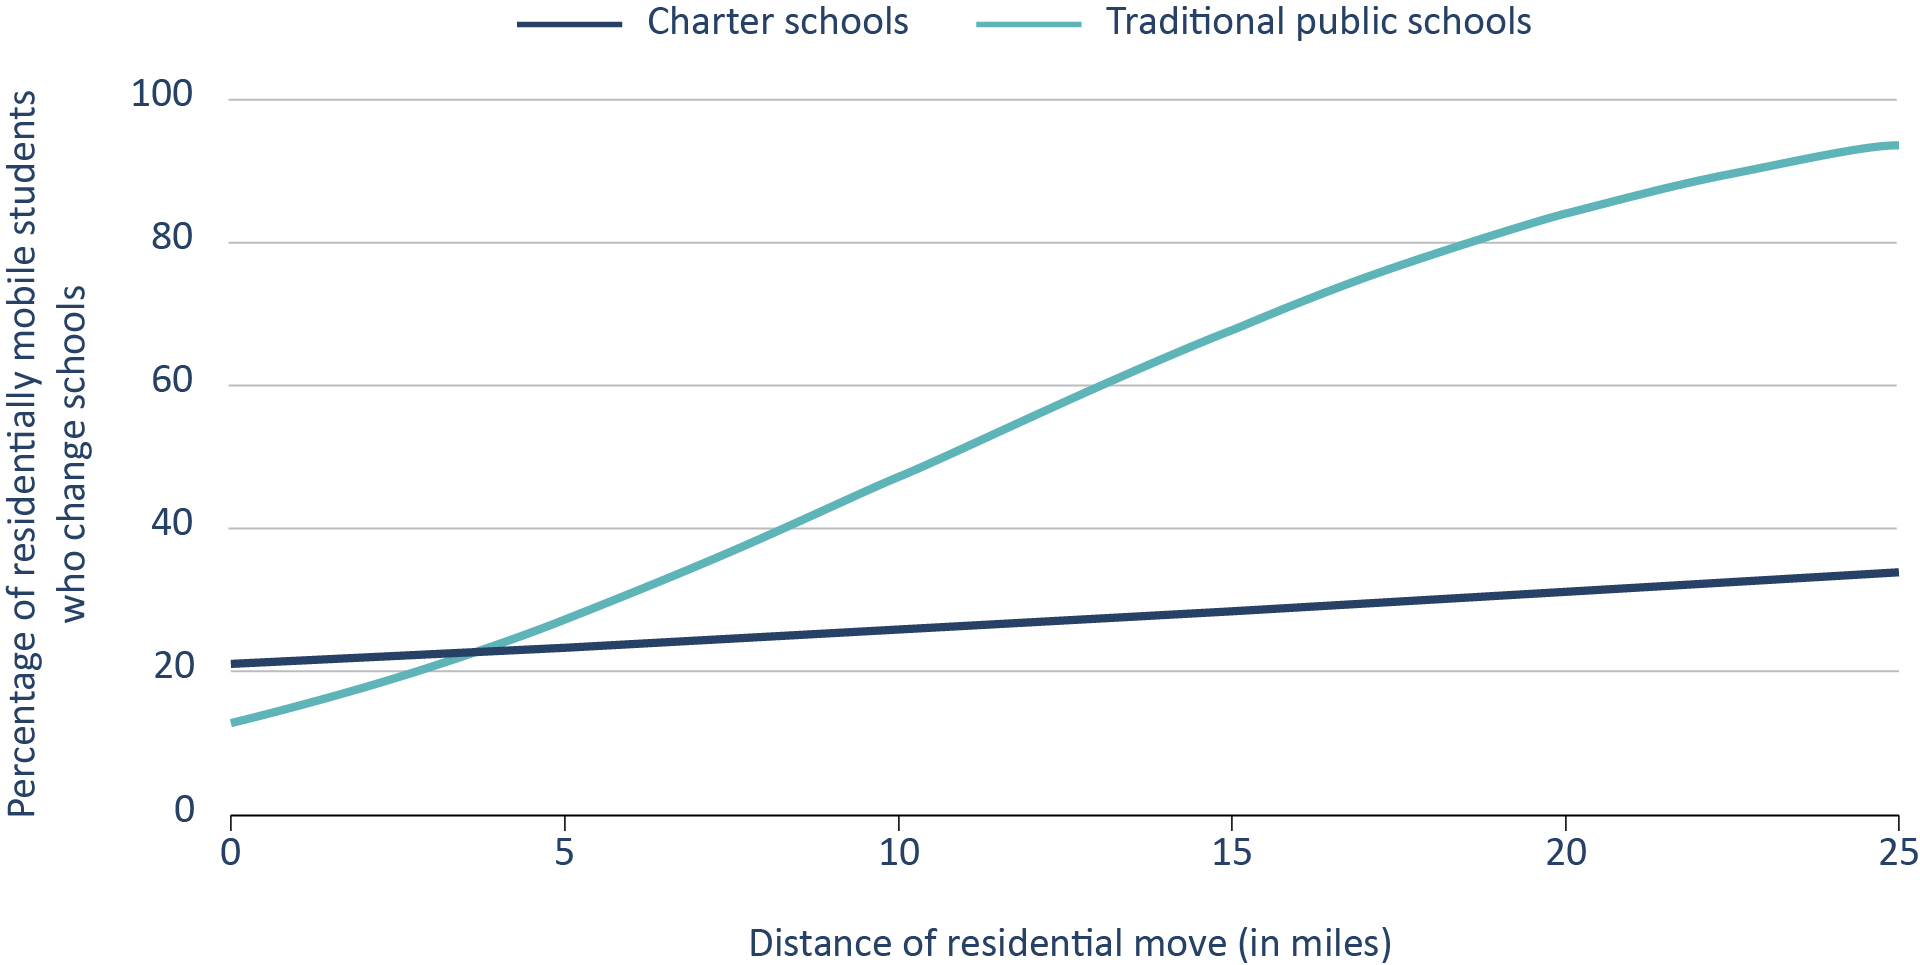 Figure 8. As the distance of the residential move increases, students in charter schools become less likely to change schools than those in traditional public schools.